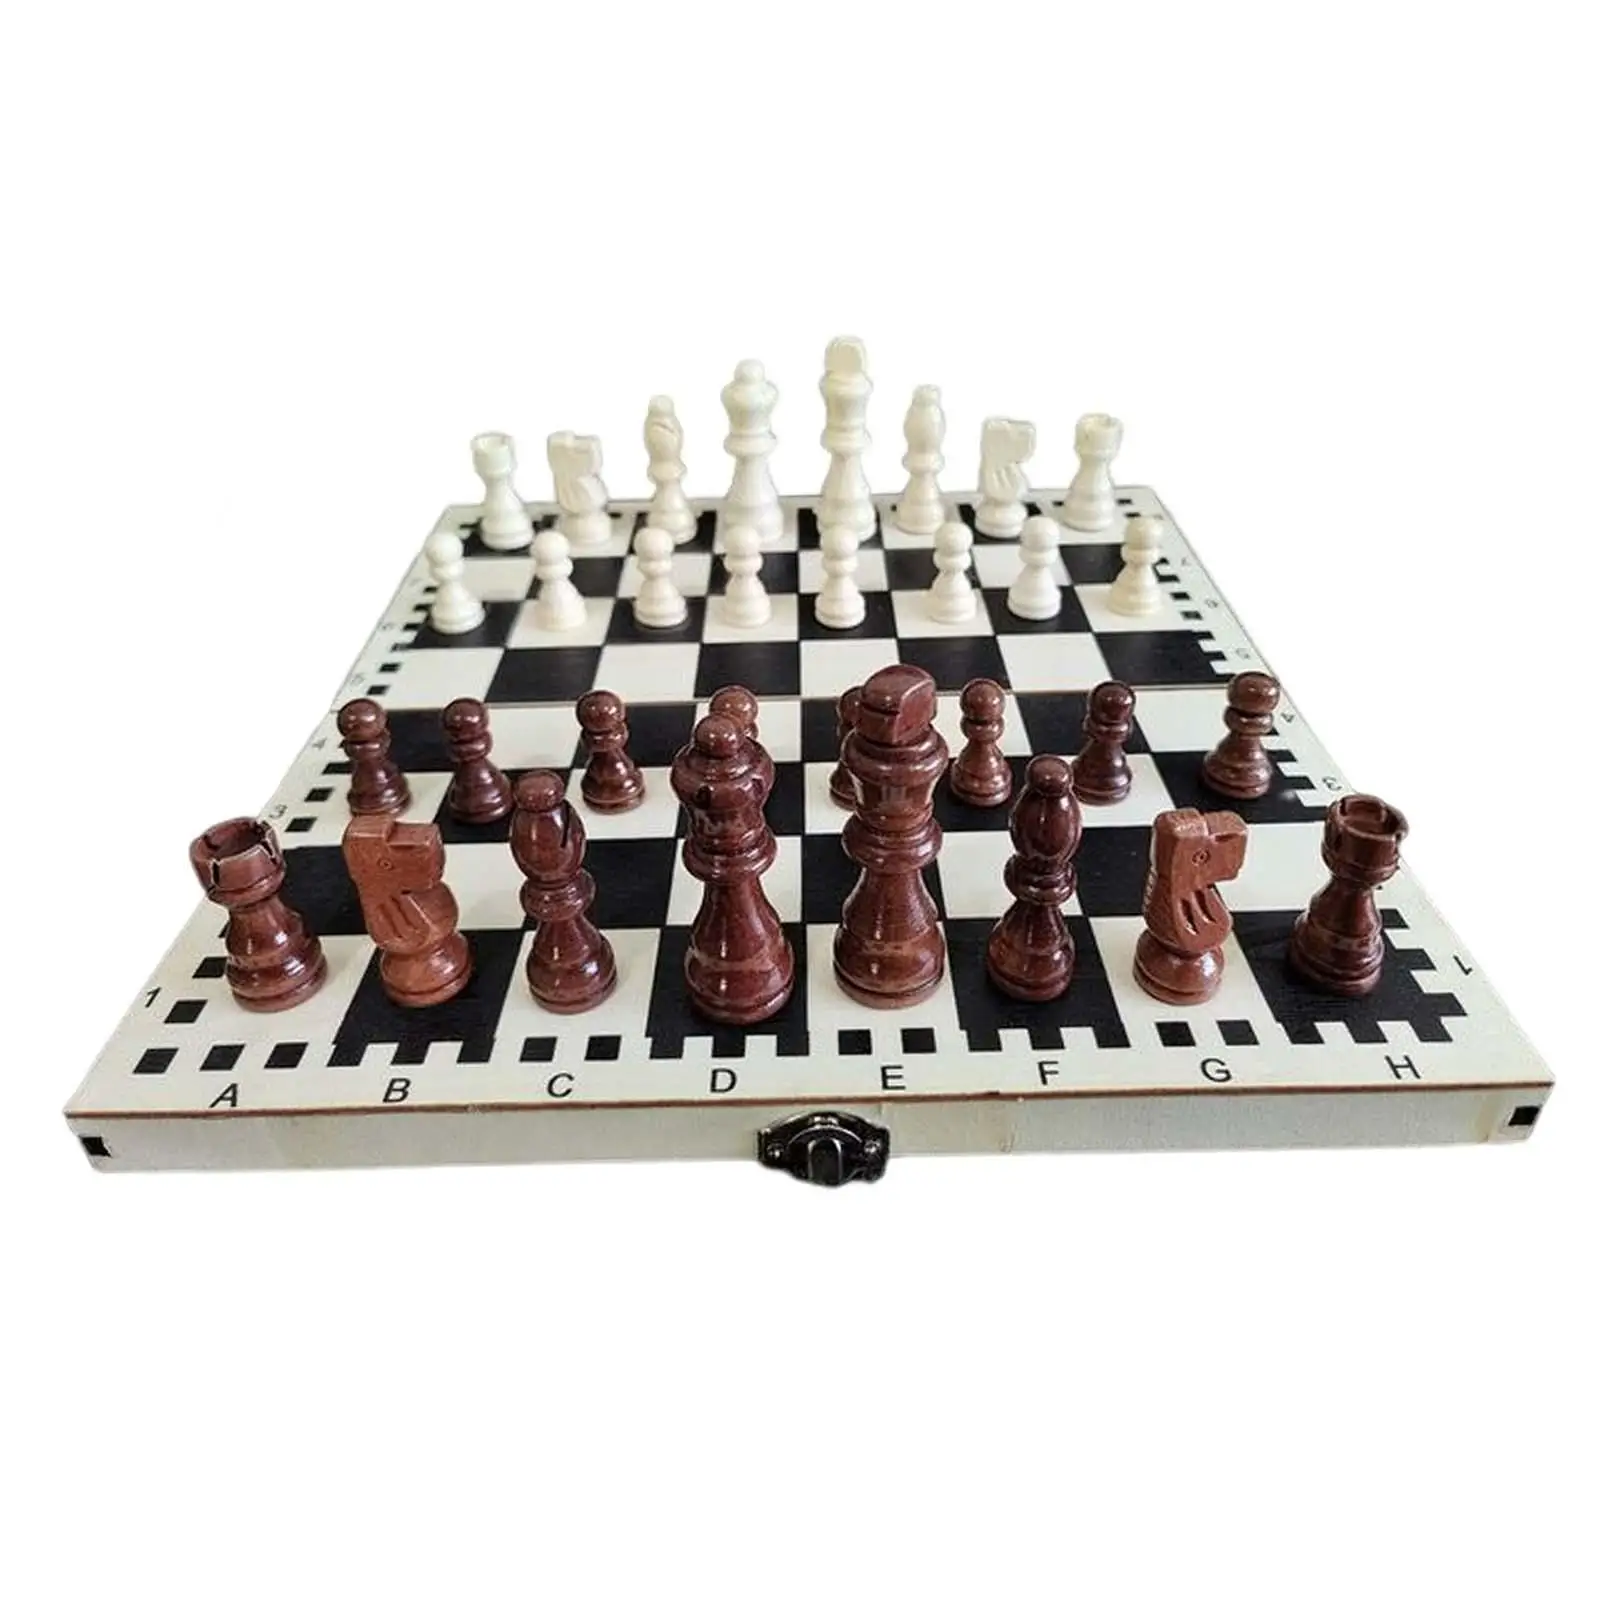 Wooden Folding Board Chess Set 30x30cm Handmade Entertainment Tool Accessories for Travelling Game Play